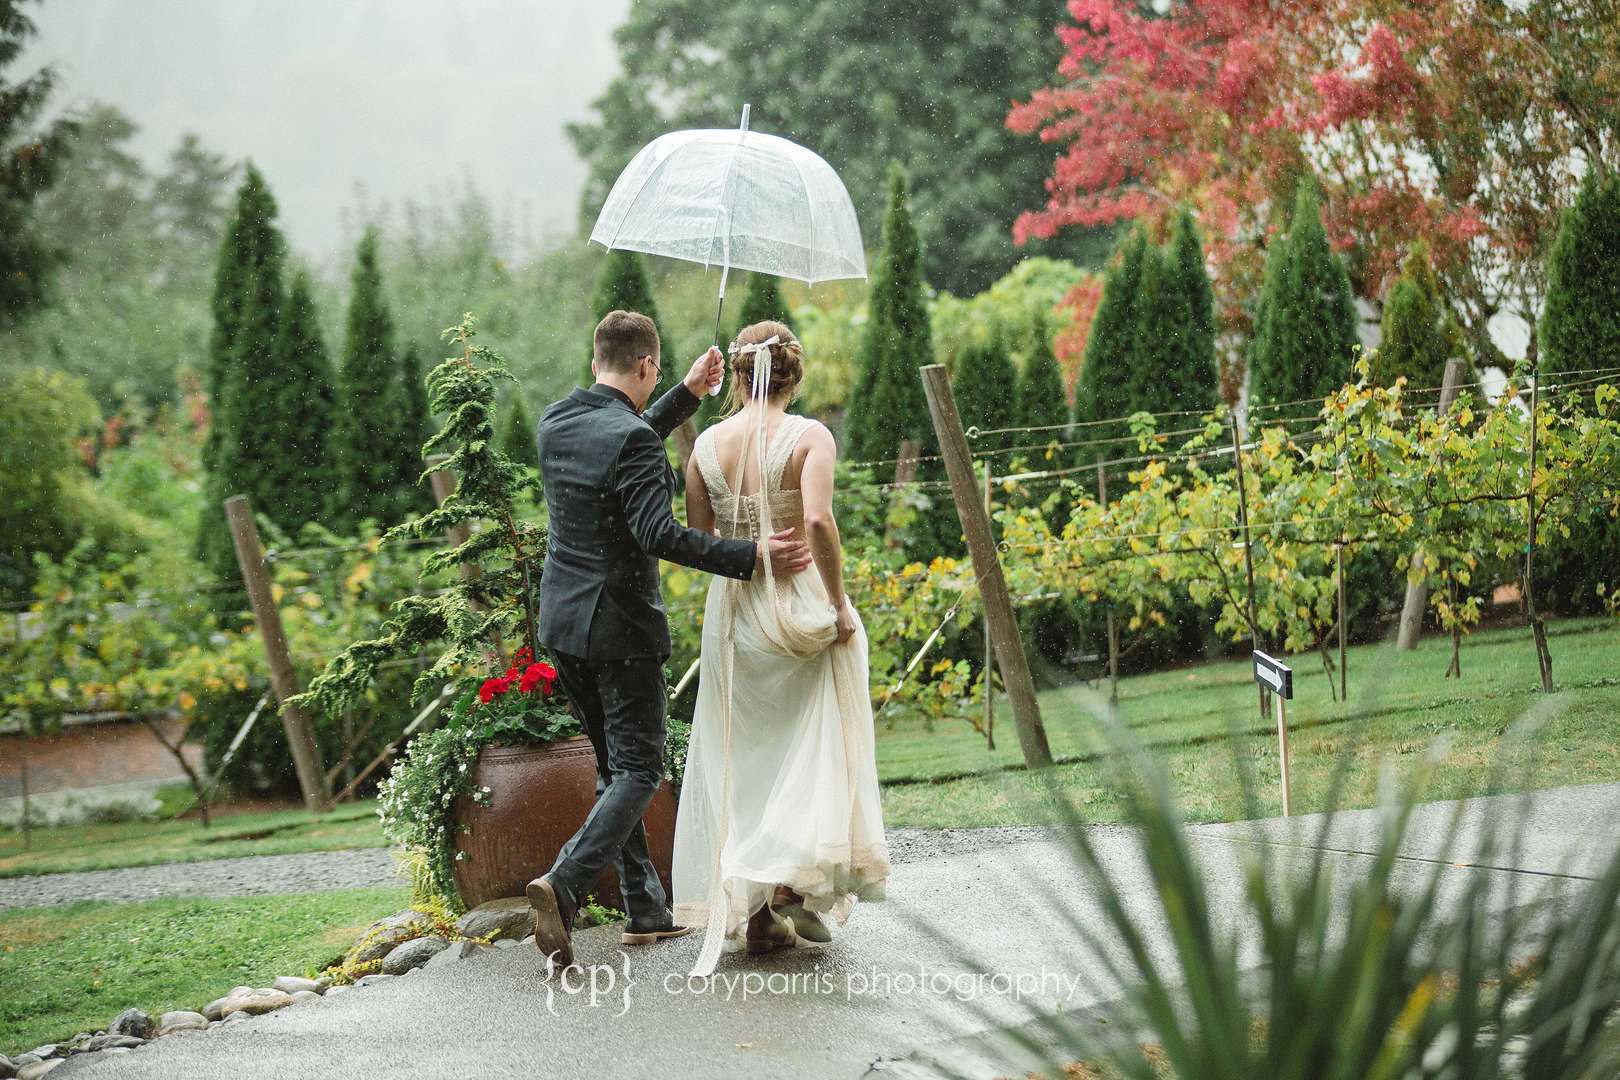  Walking together in the rain after getting married. 